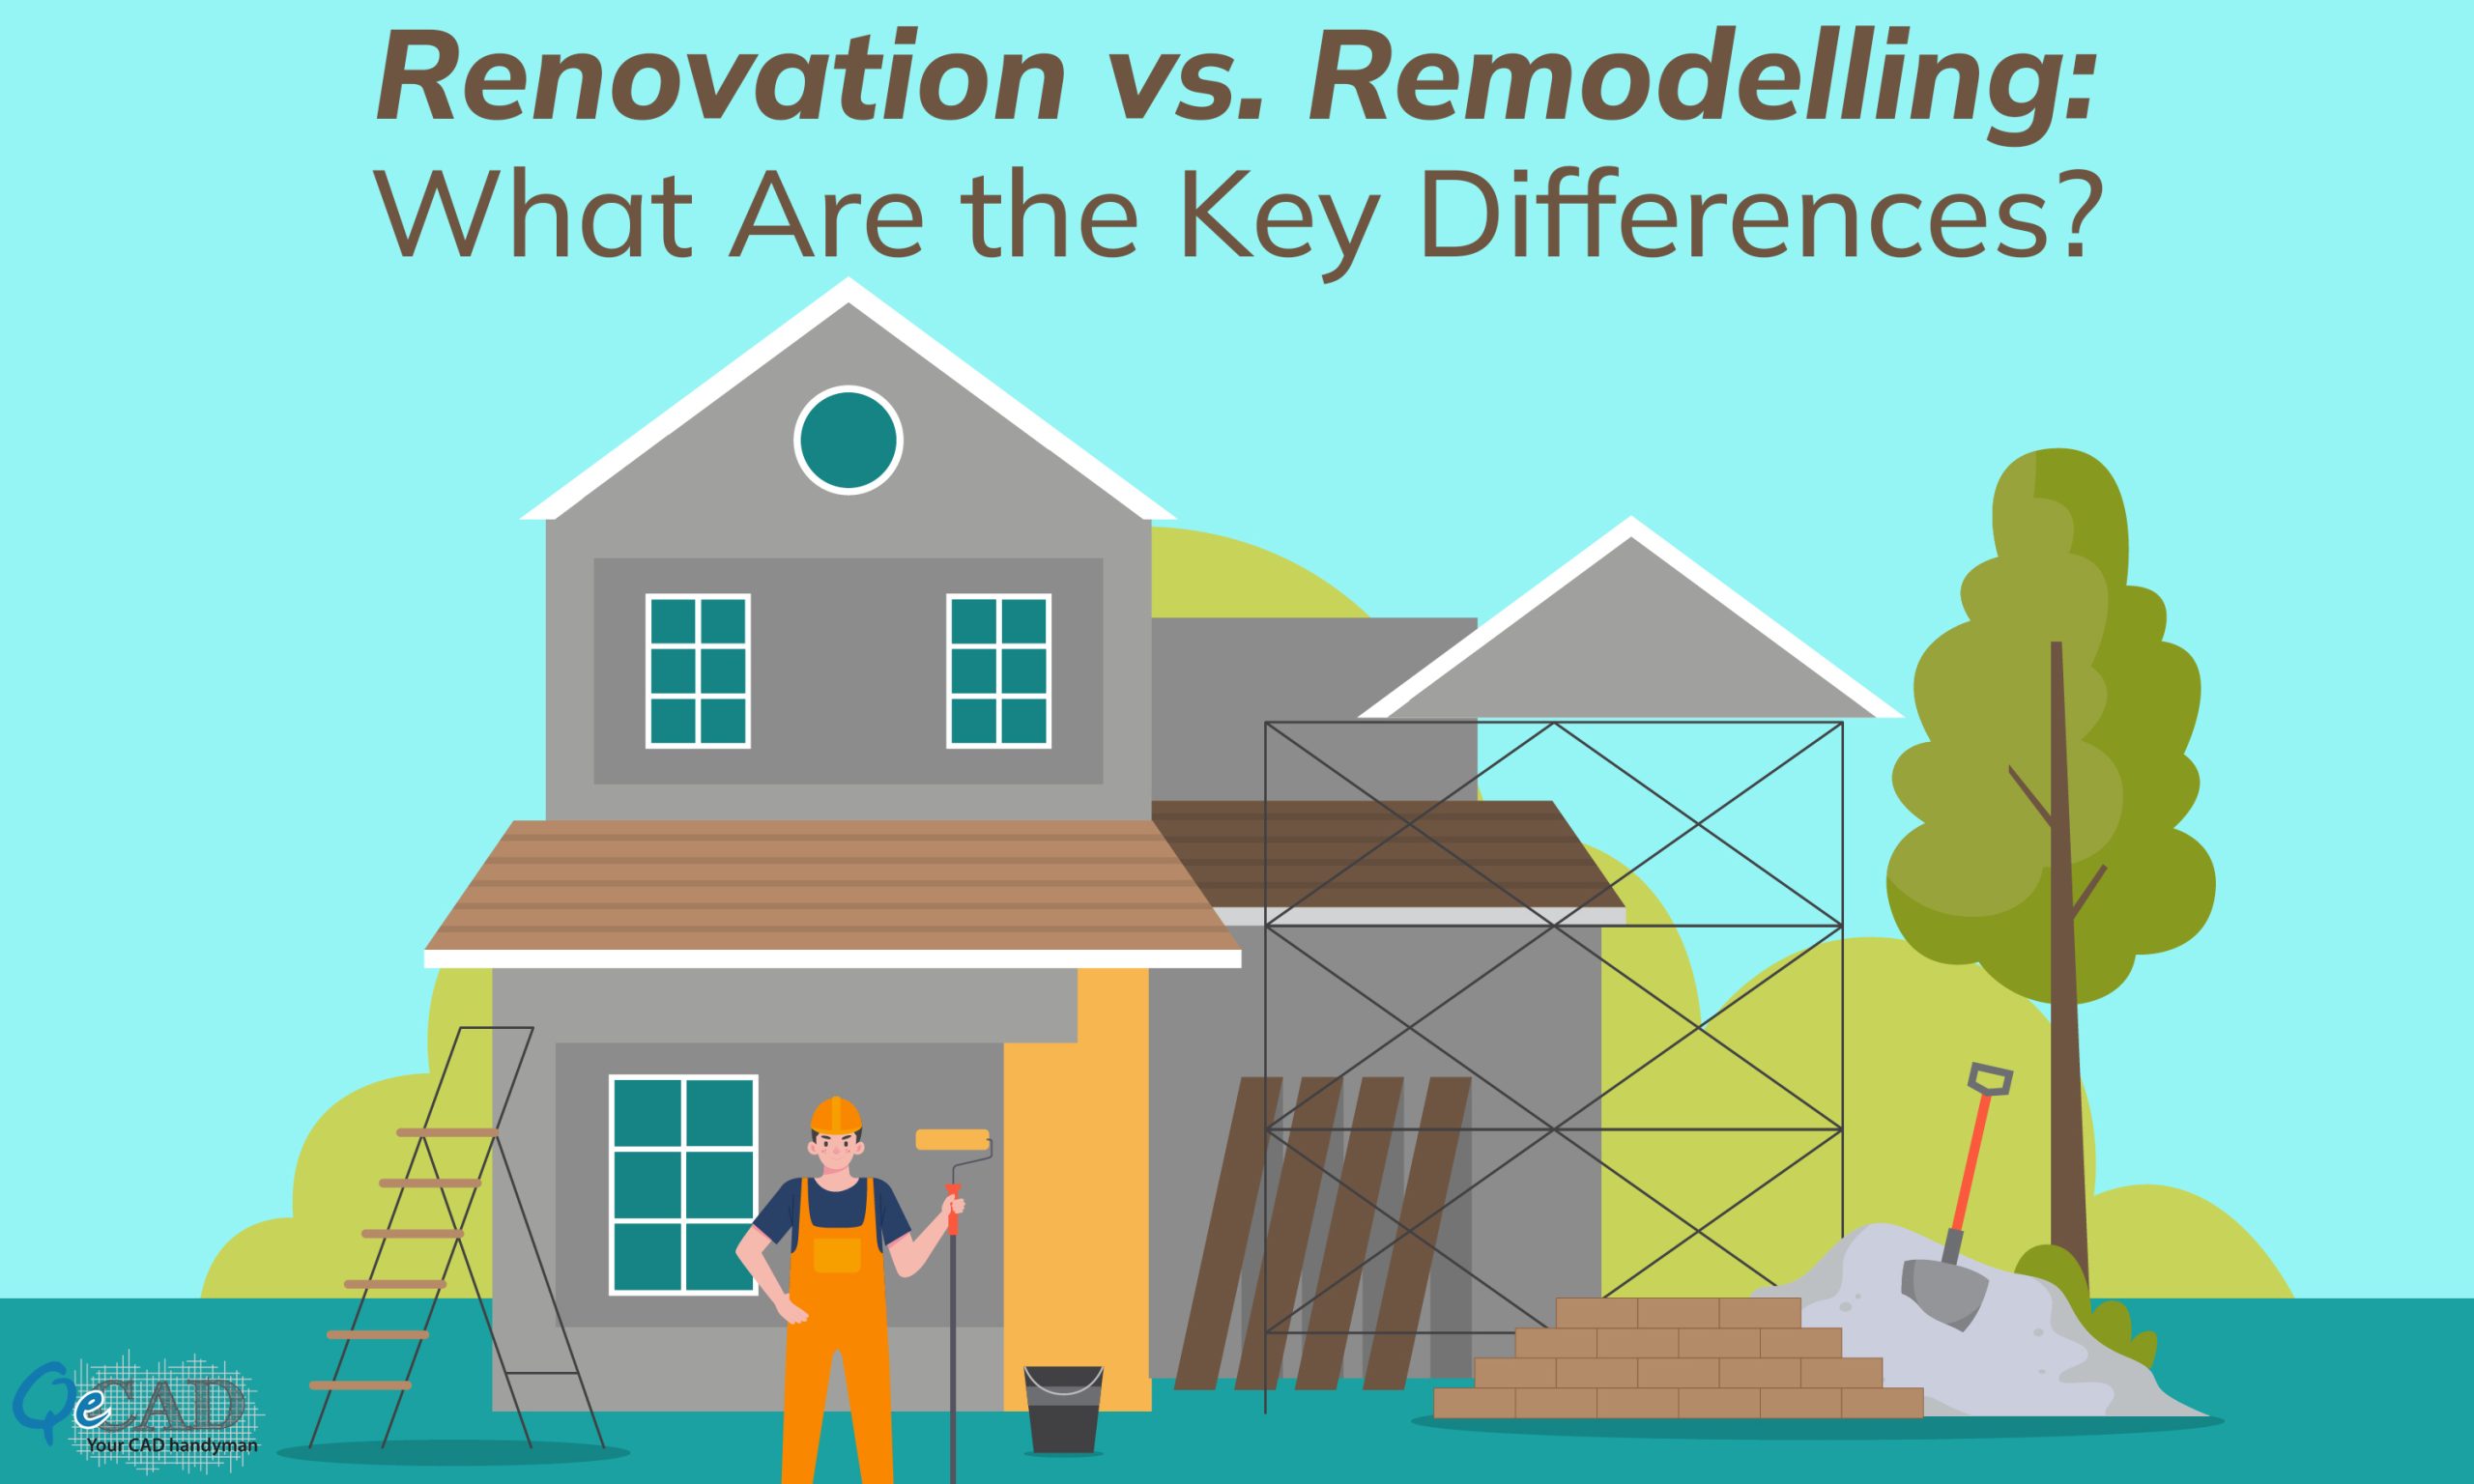 Renovation vs. Remodelling: What Are the Key Differences?